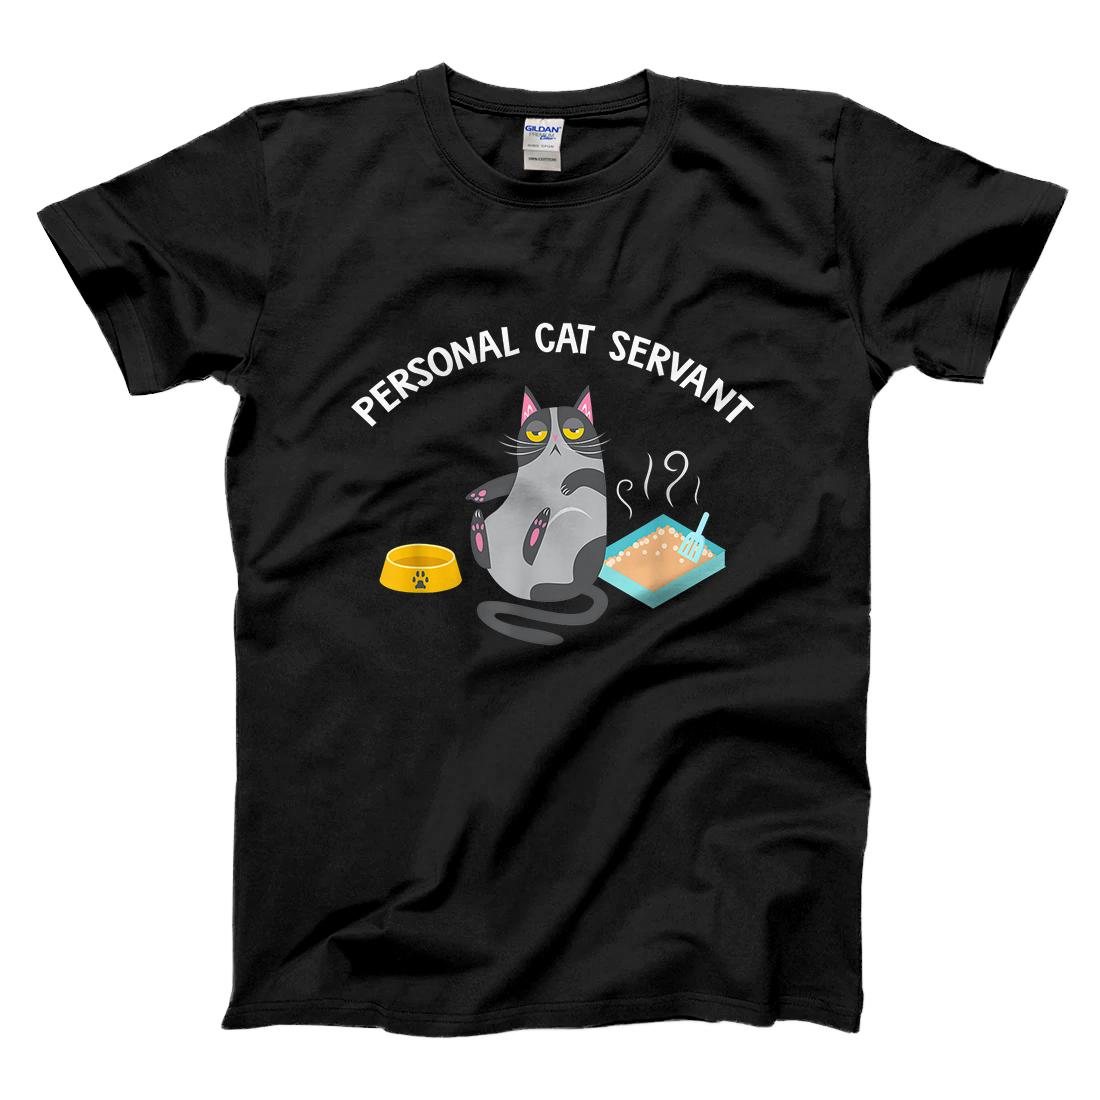 Personalized Personal Cat Servant - Funny Cat Lover Gift T-Shirt